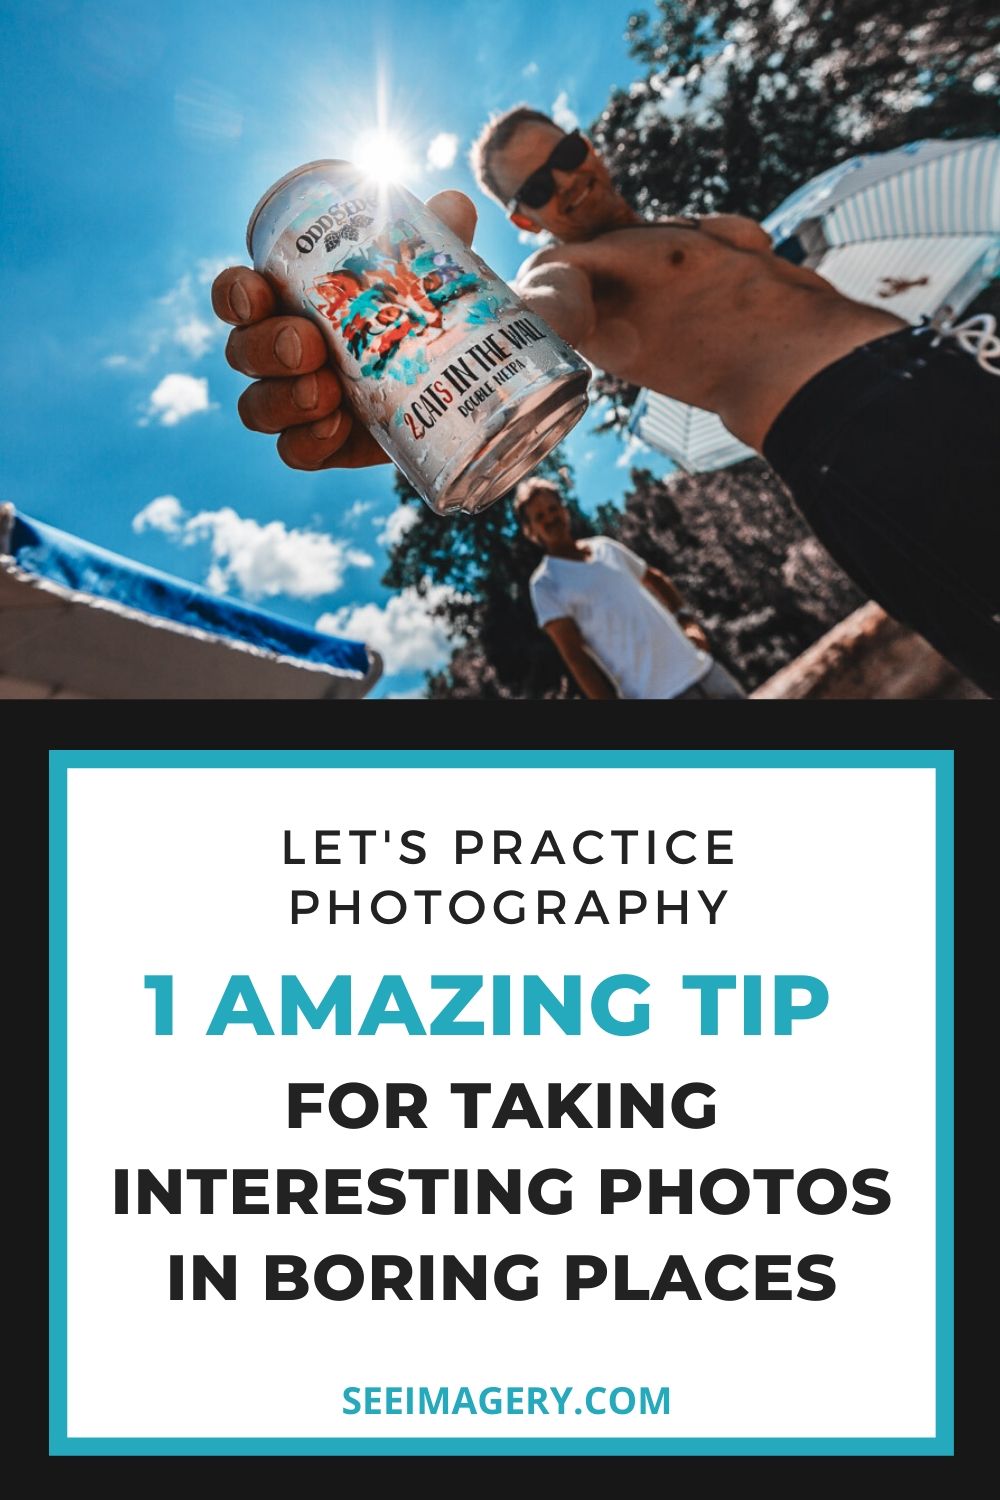 Tips for taking interesting photos in boring places